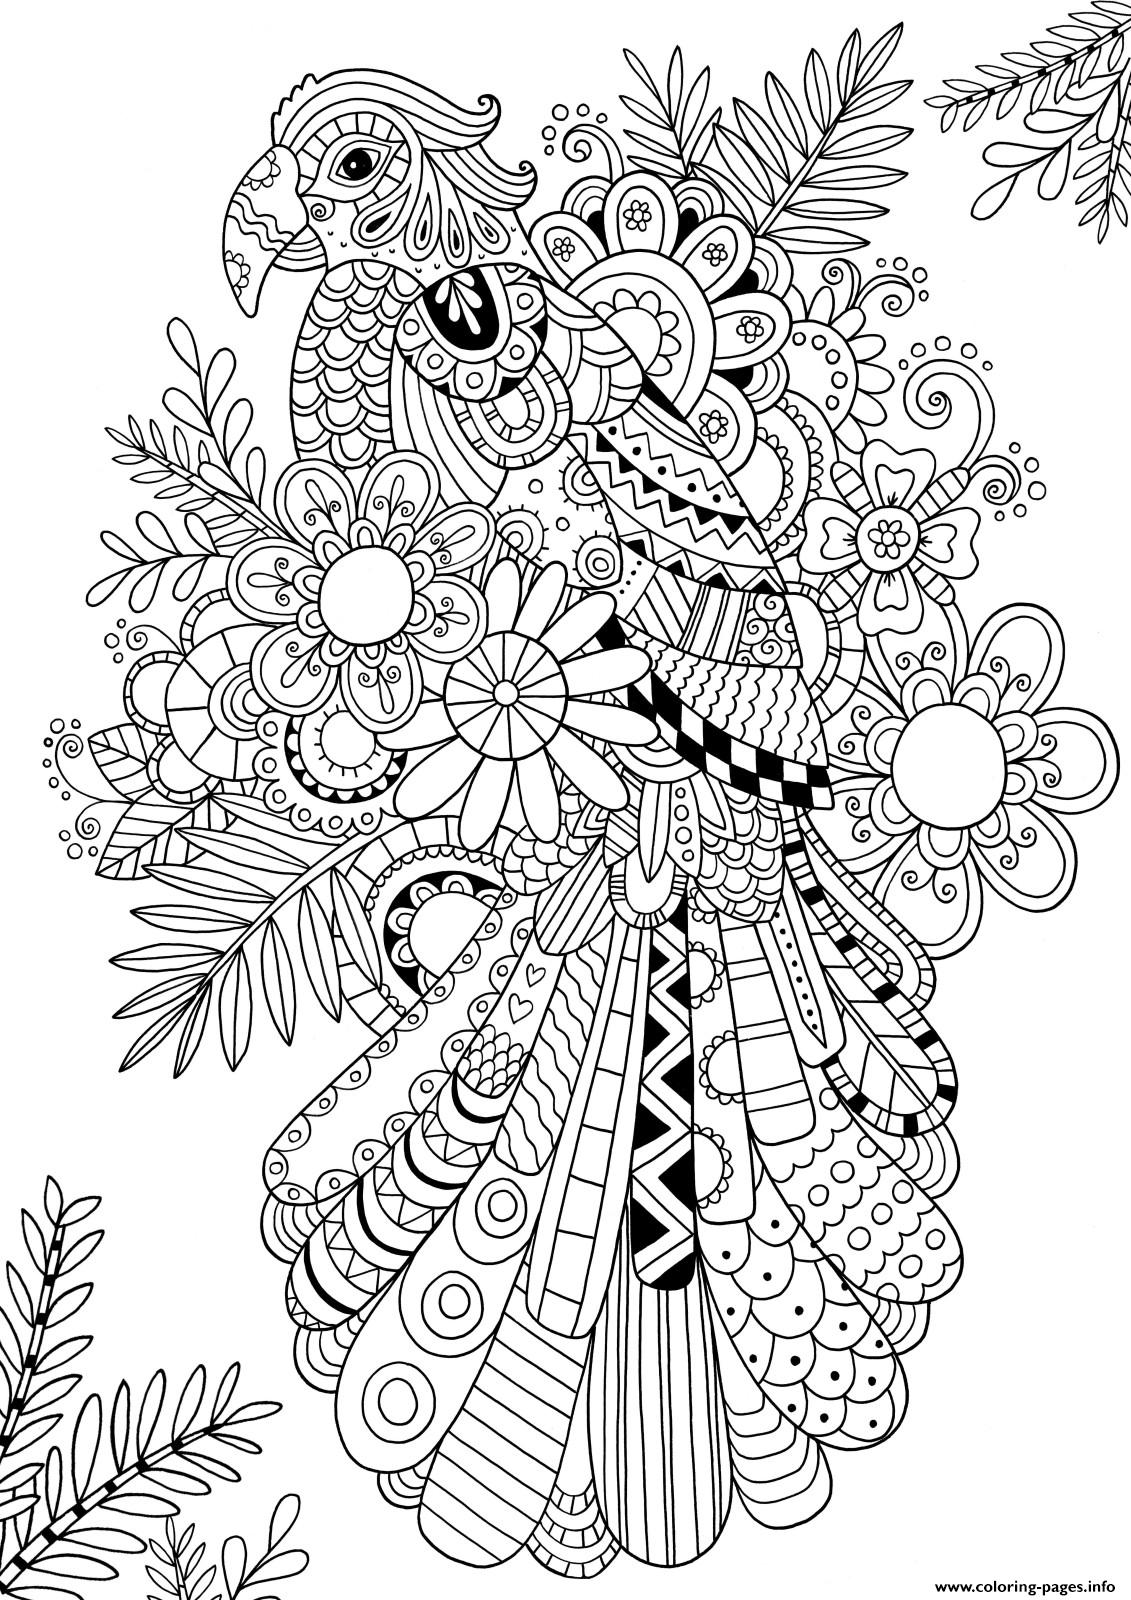 Zentangle Parrot Adult coloring